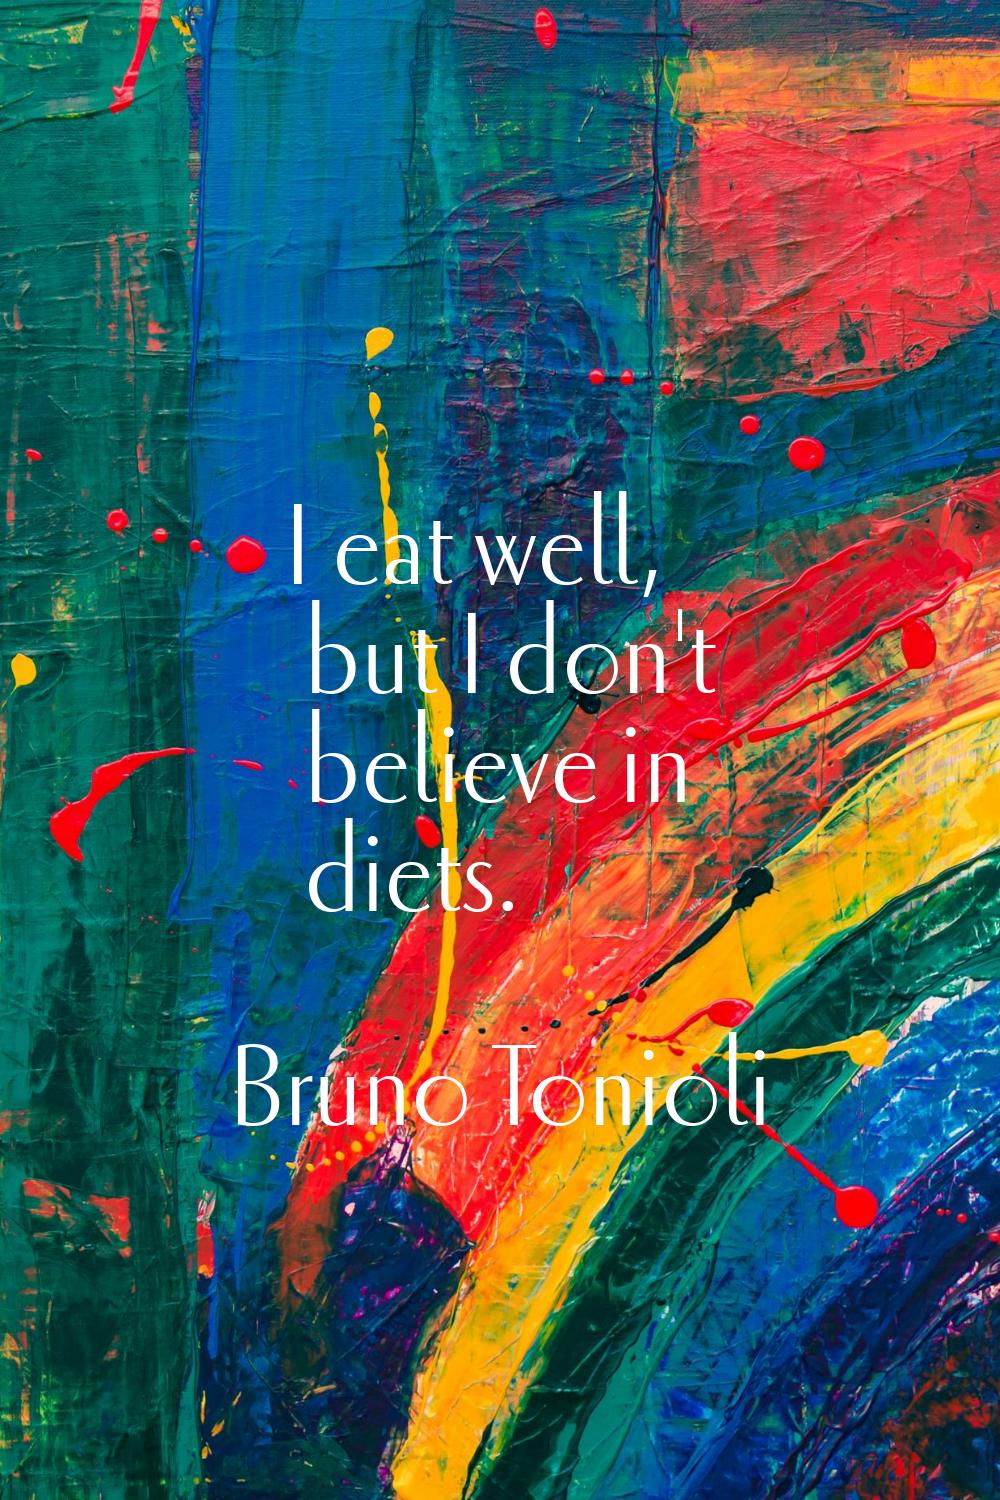 I eat well, but I don't believe in diets.